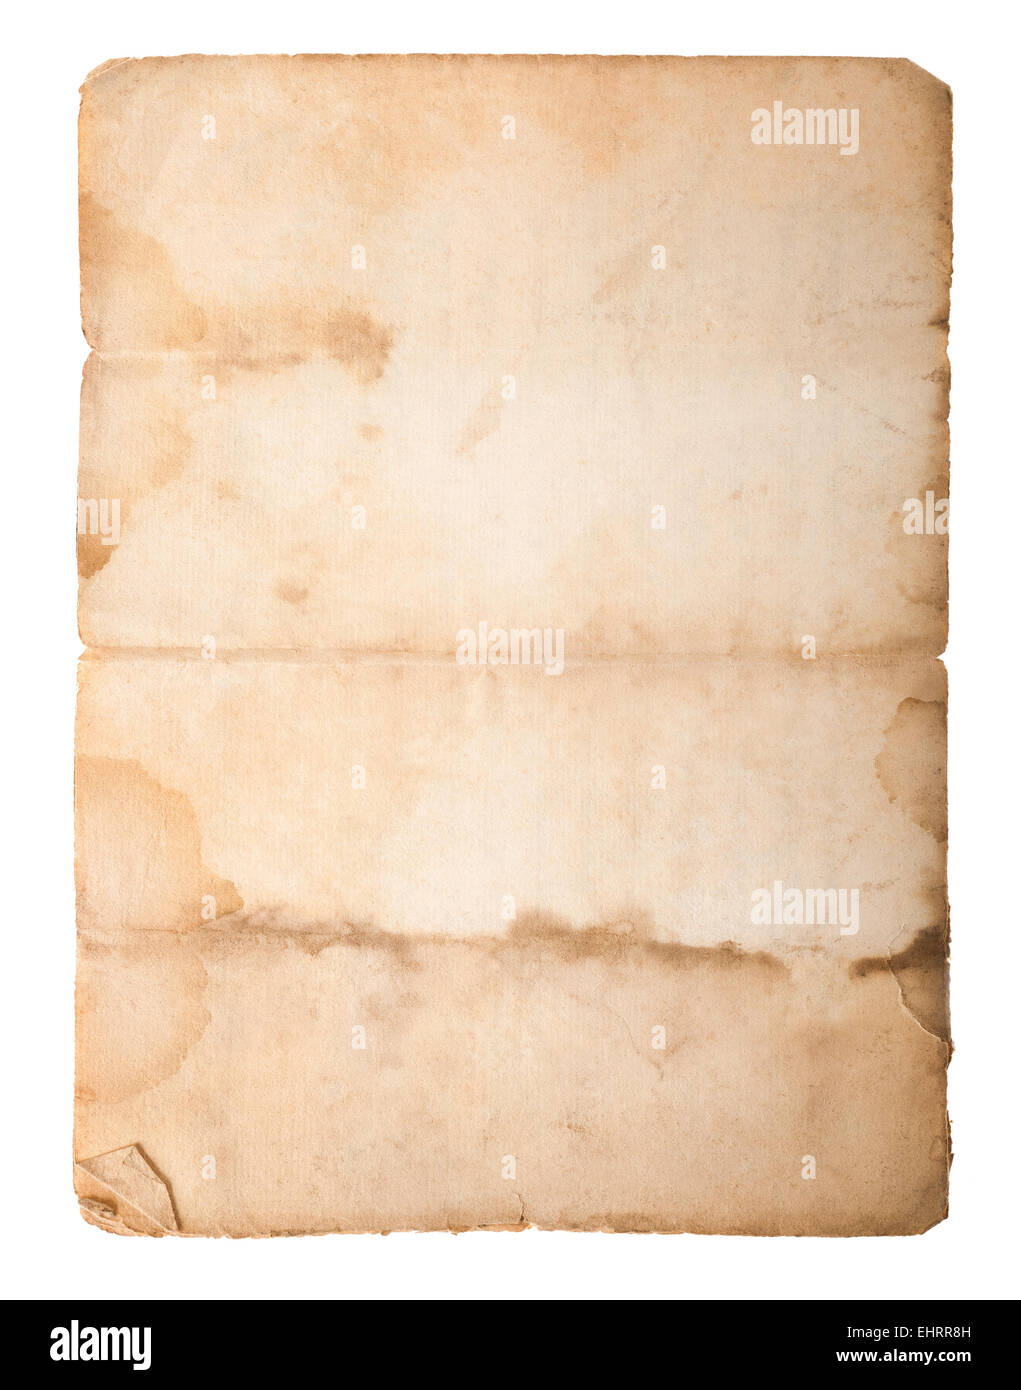 Dirty old paper isolated on white Stock Photo